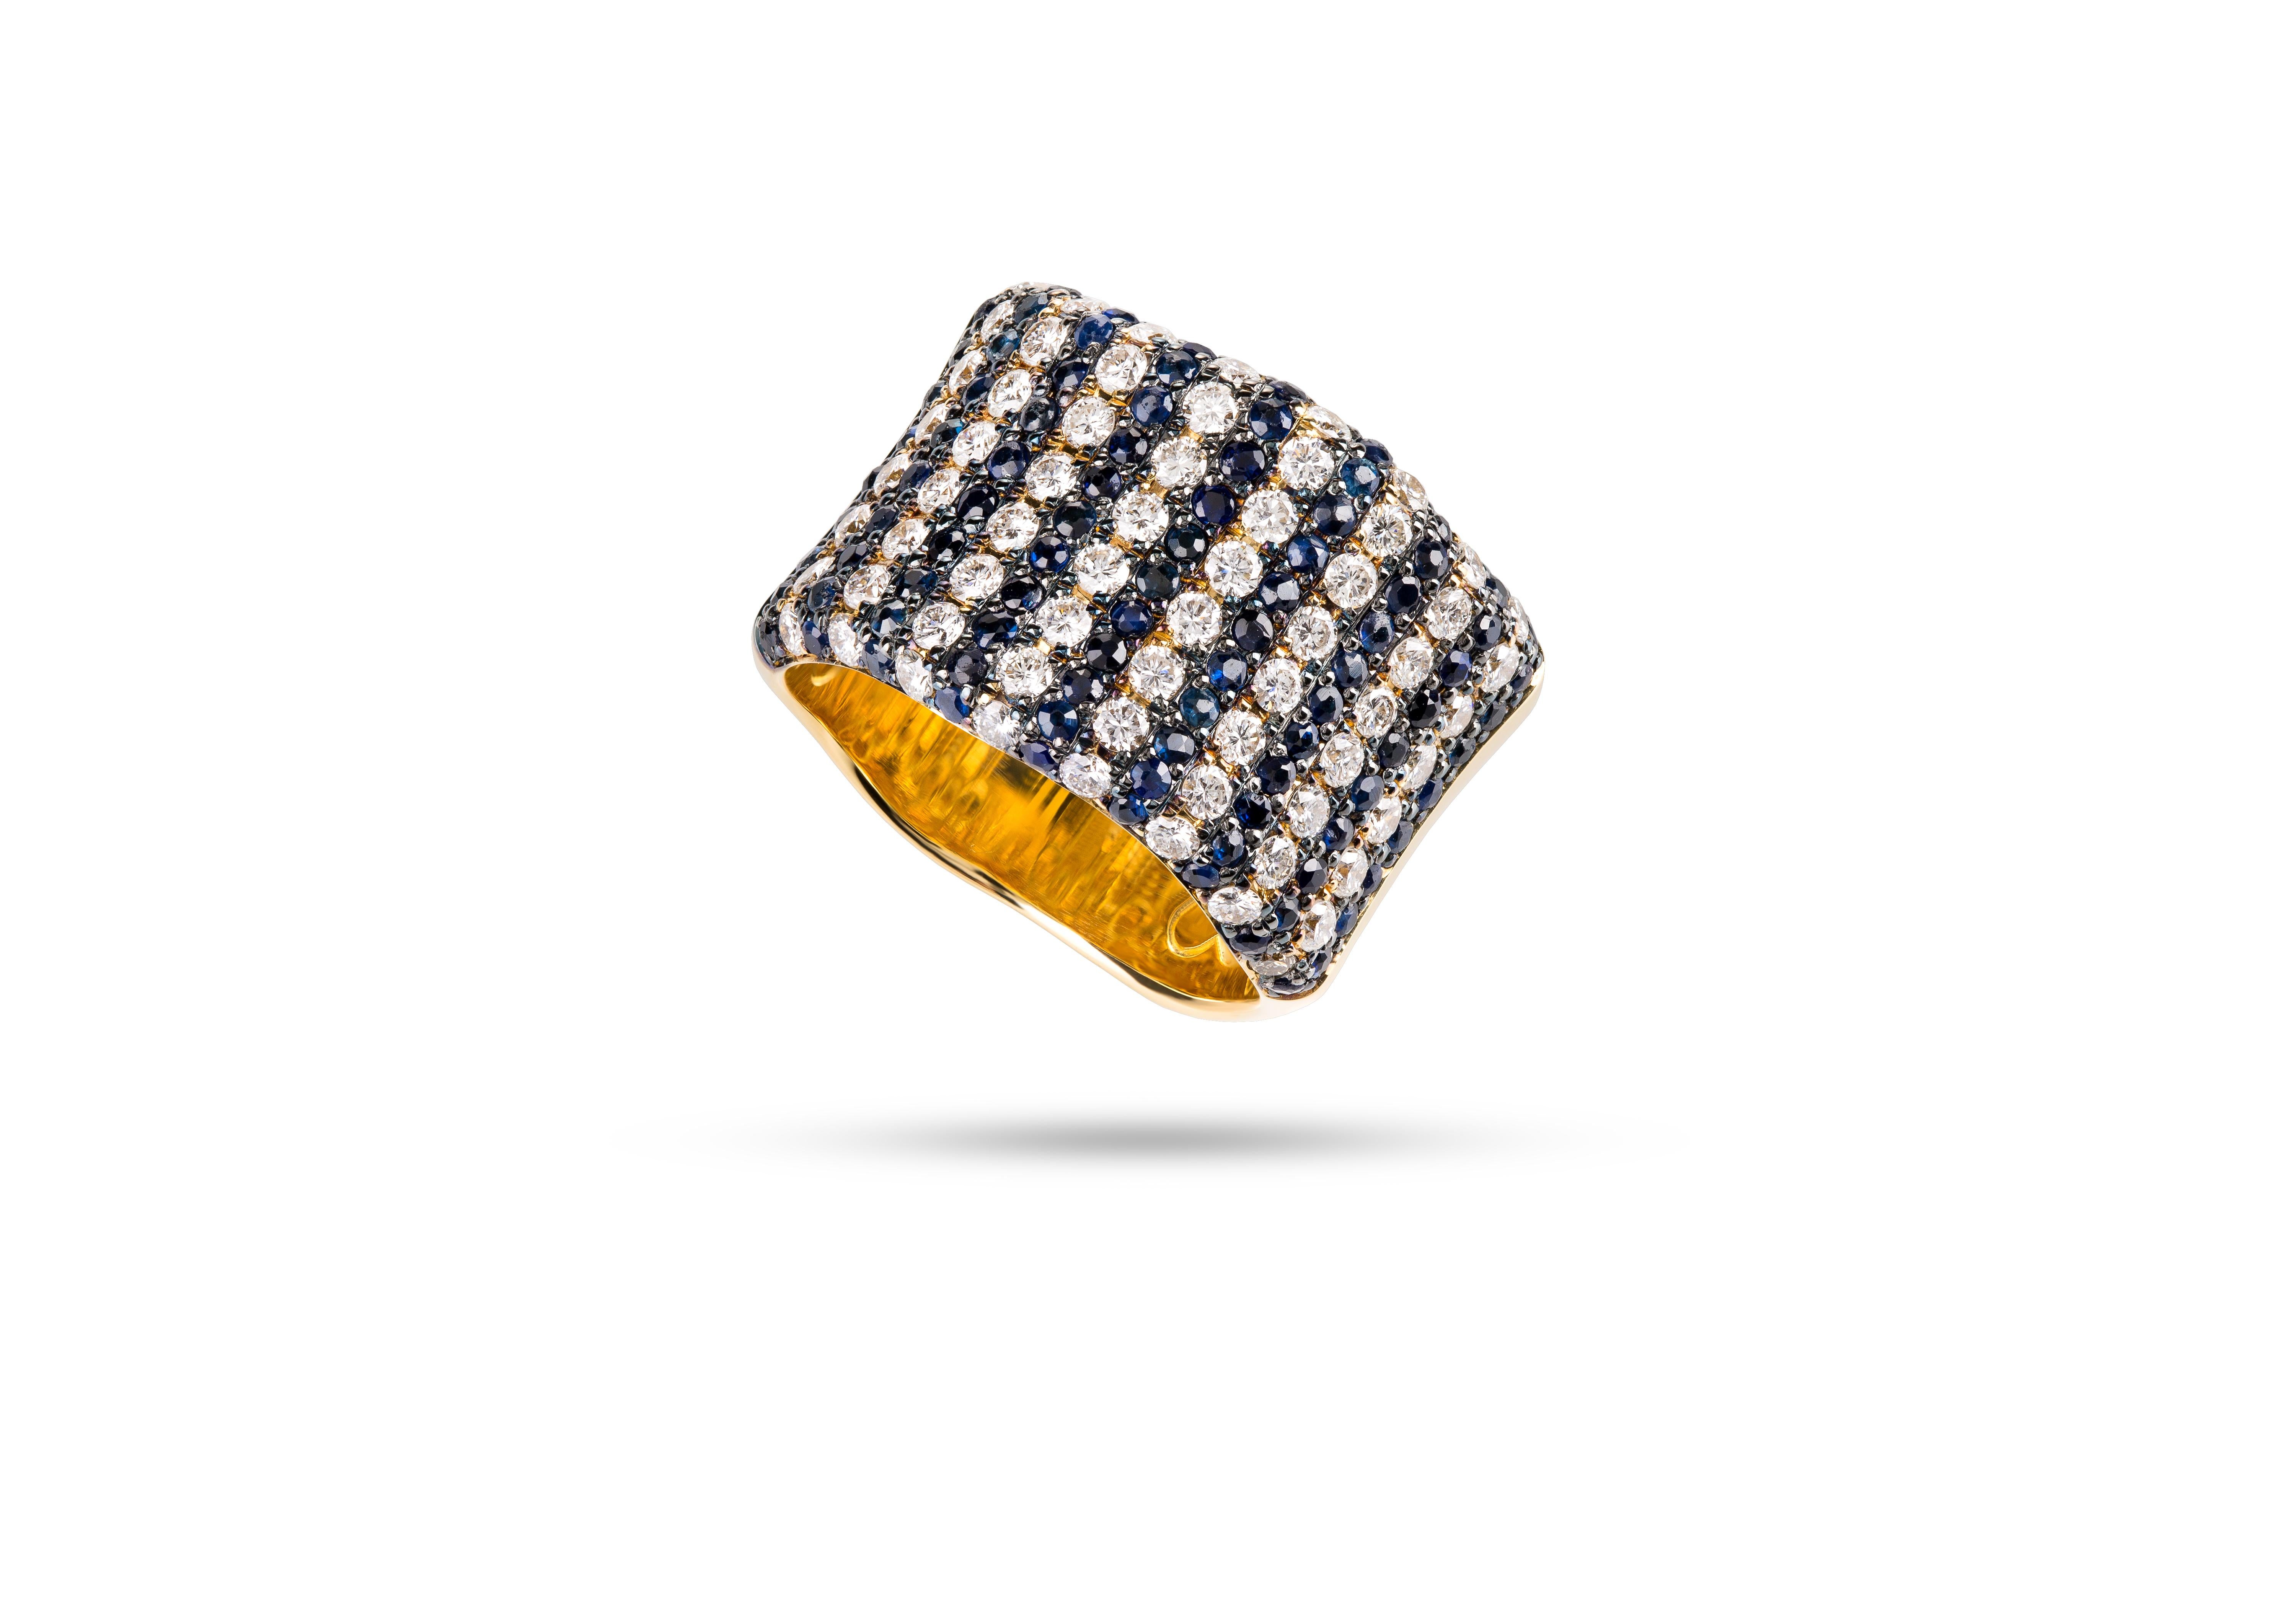 Rosior Contemporary Ring Manufactured in 19,2k Yellow Gold and setted with:
- 94 blue sapphires with 1,19ct,
- 64 white (G-VVS) diamonds with 1,21ct.
Black rhodium finnishing.
Unique piece accompanied with its own certificate of